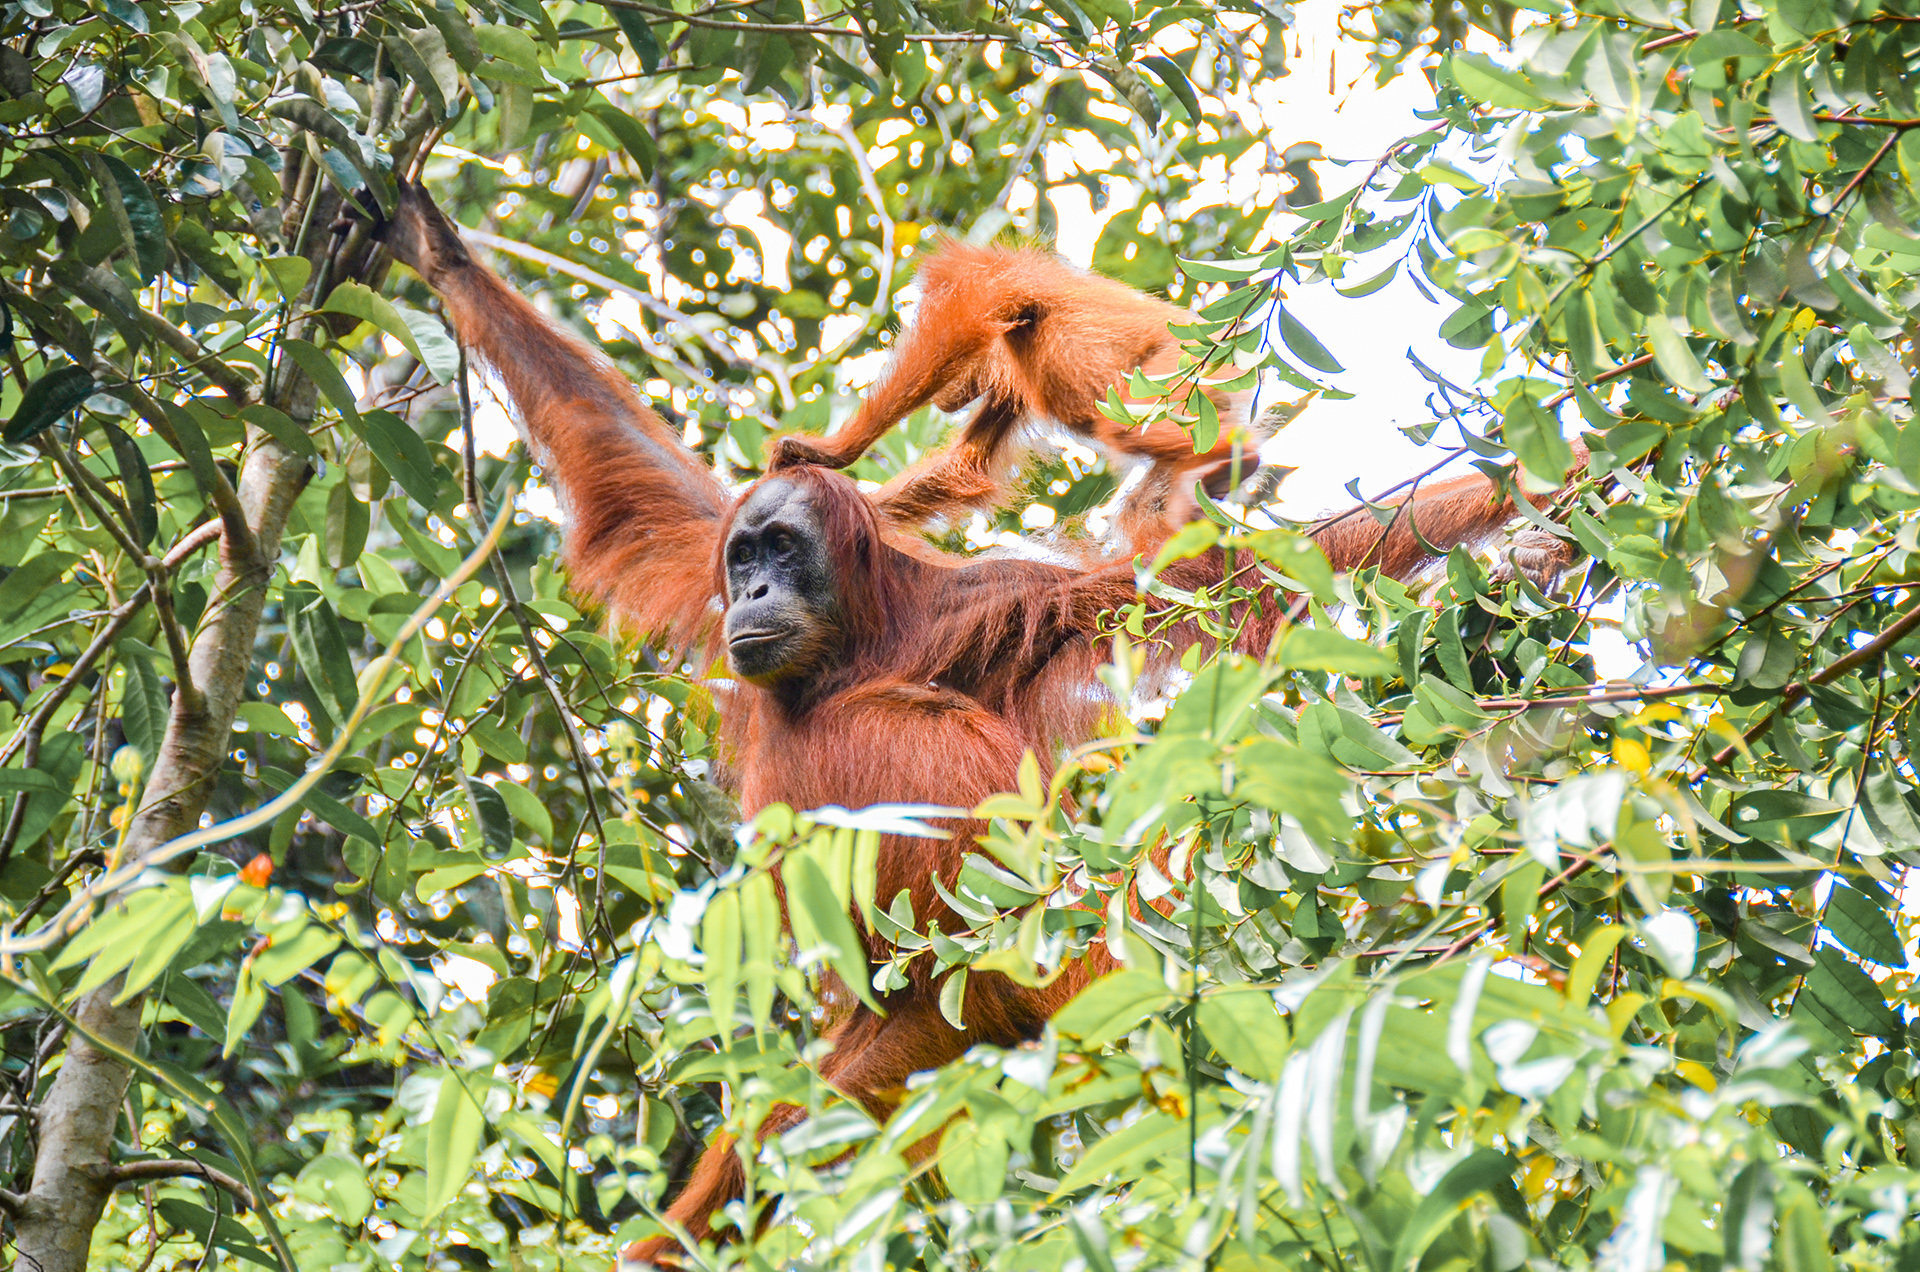 The ancestral habitat study highlights the dependence of today’s orangutans on intact rainforests.